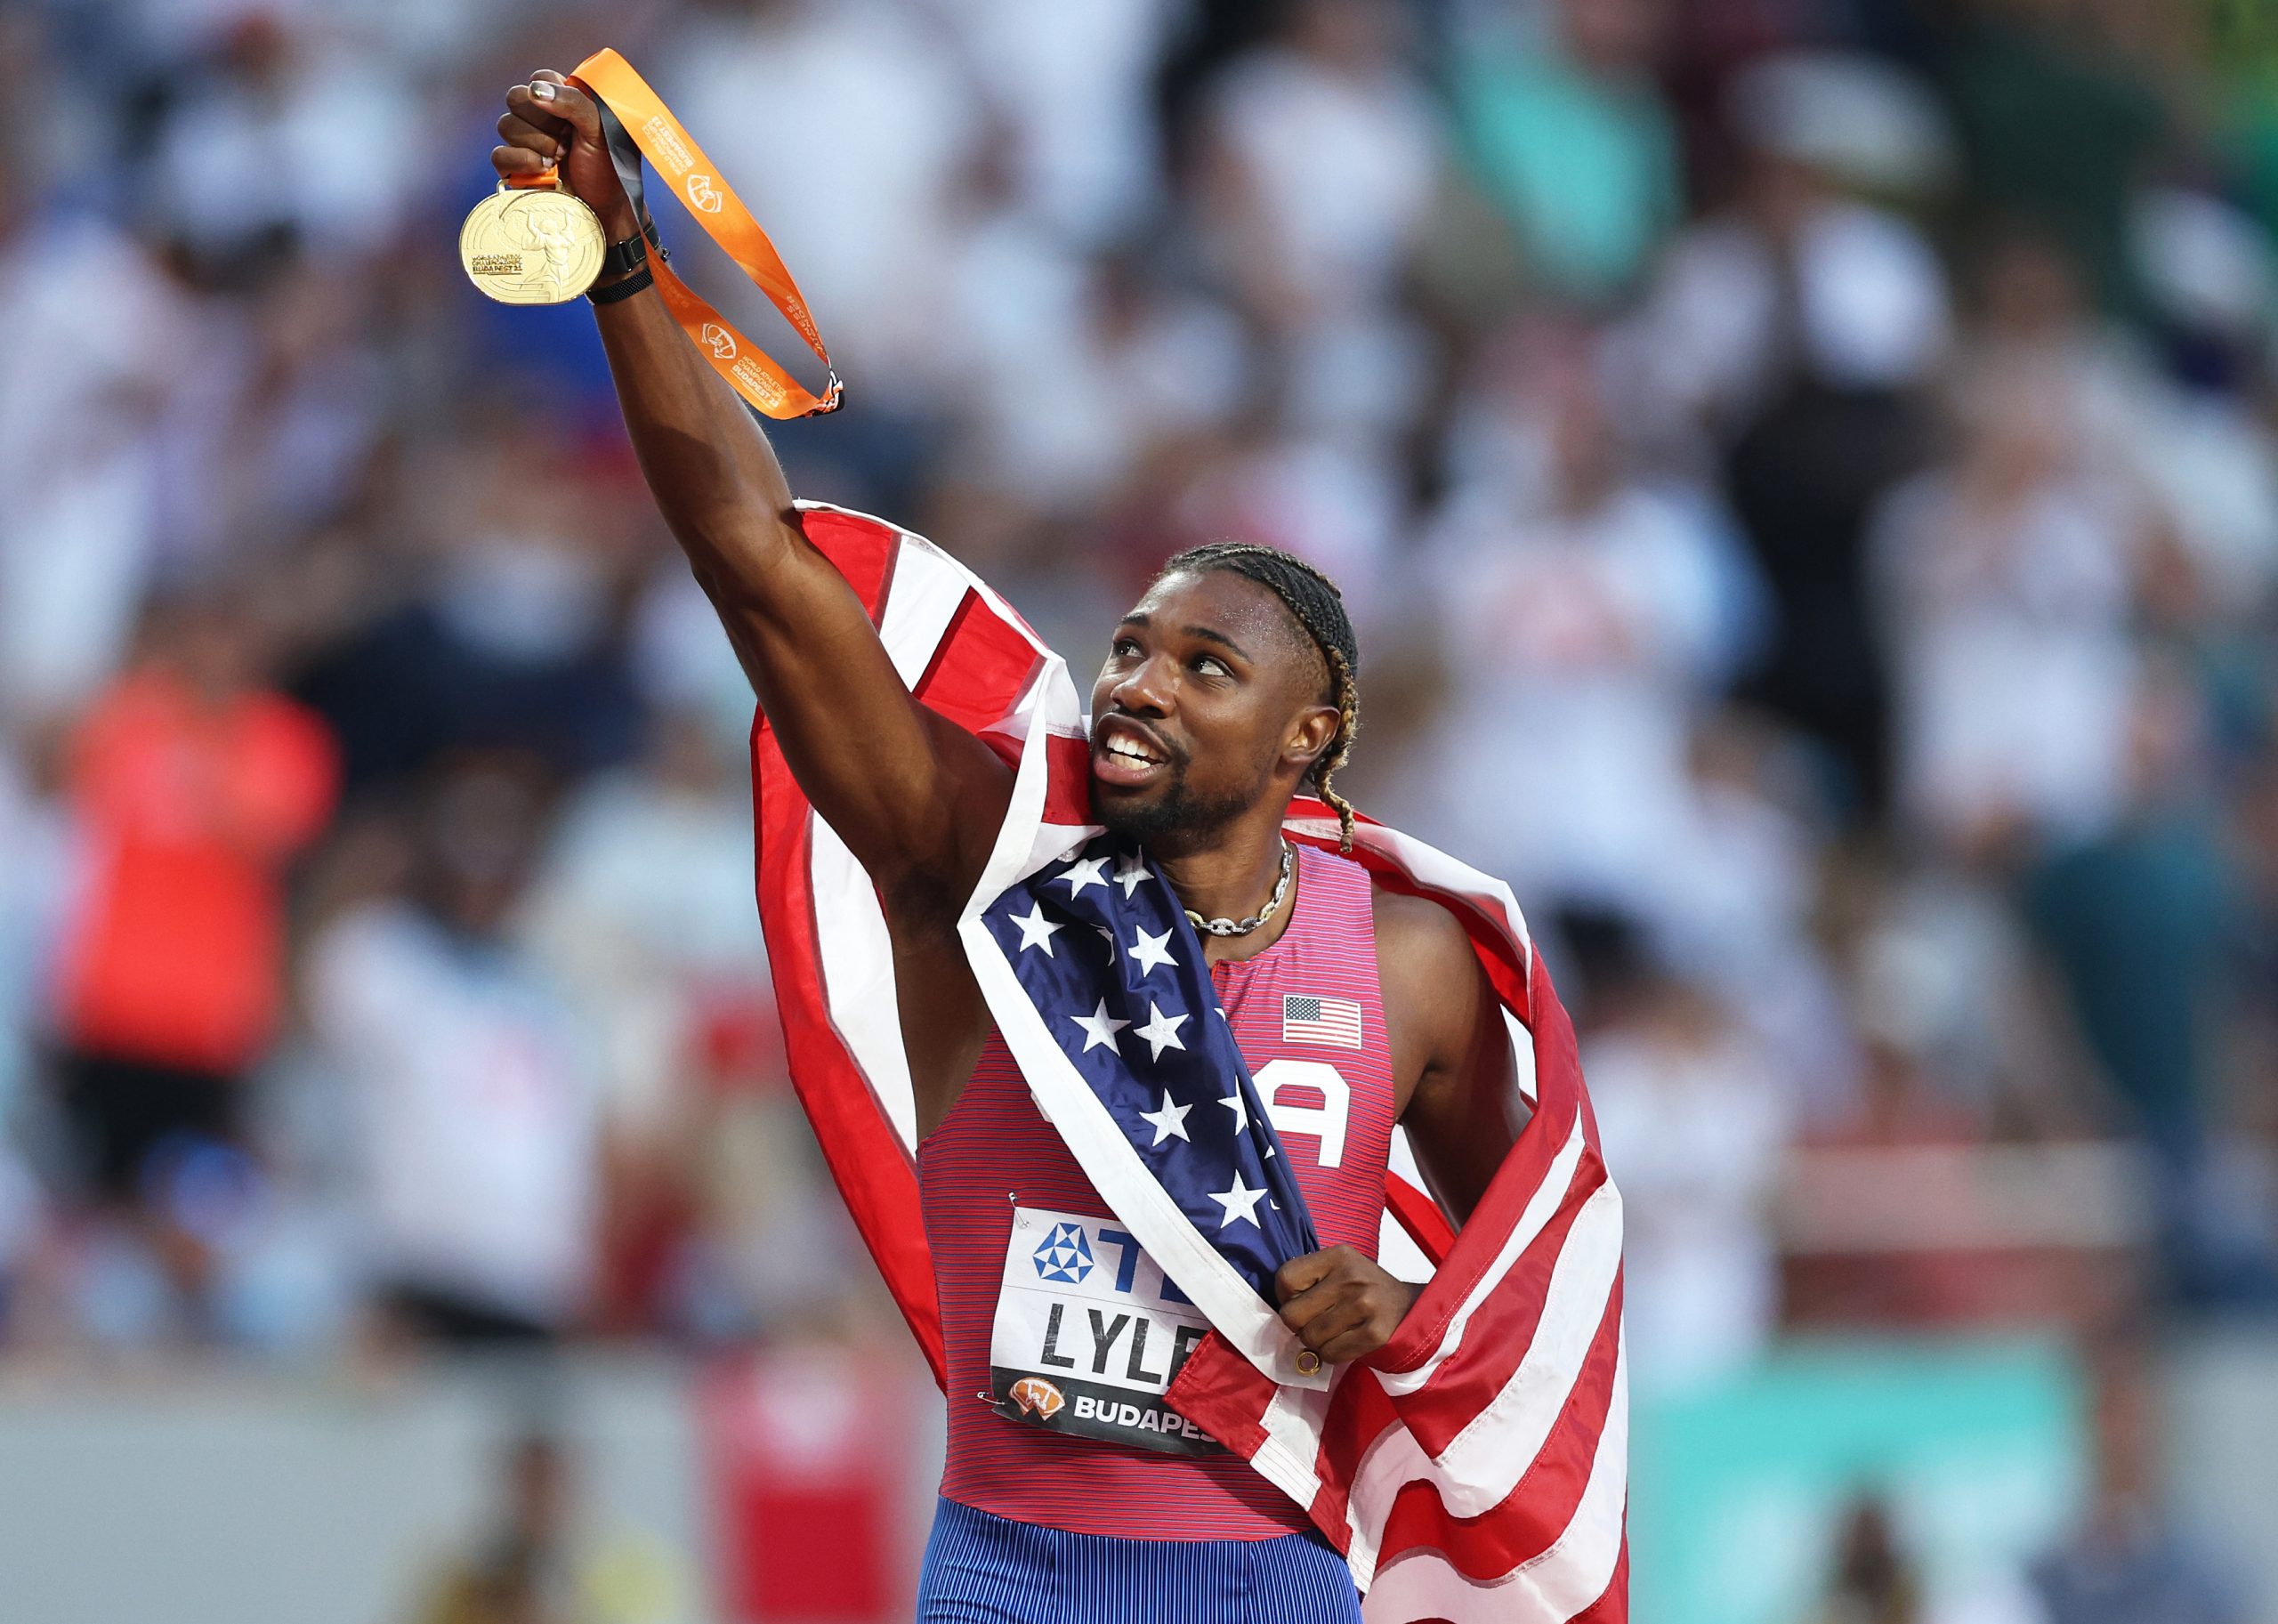 Noah Lyles wins the world 100m title in Budapest 23 World Athletics Championships